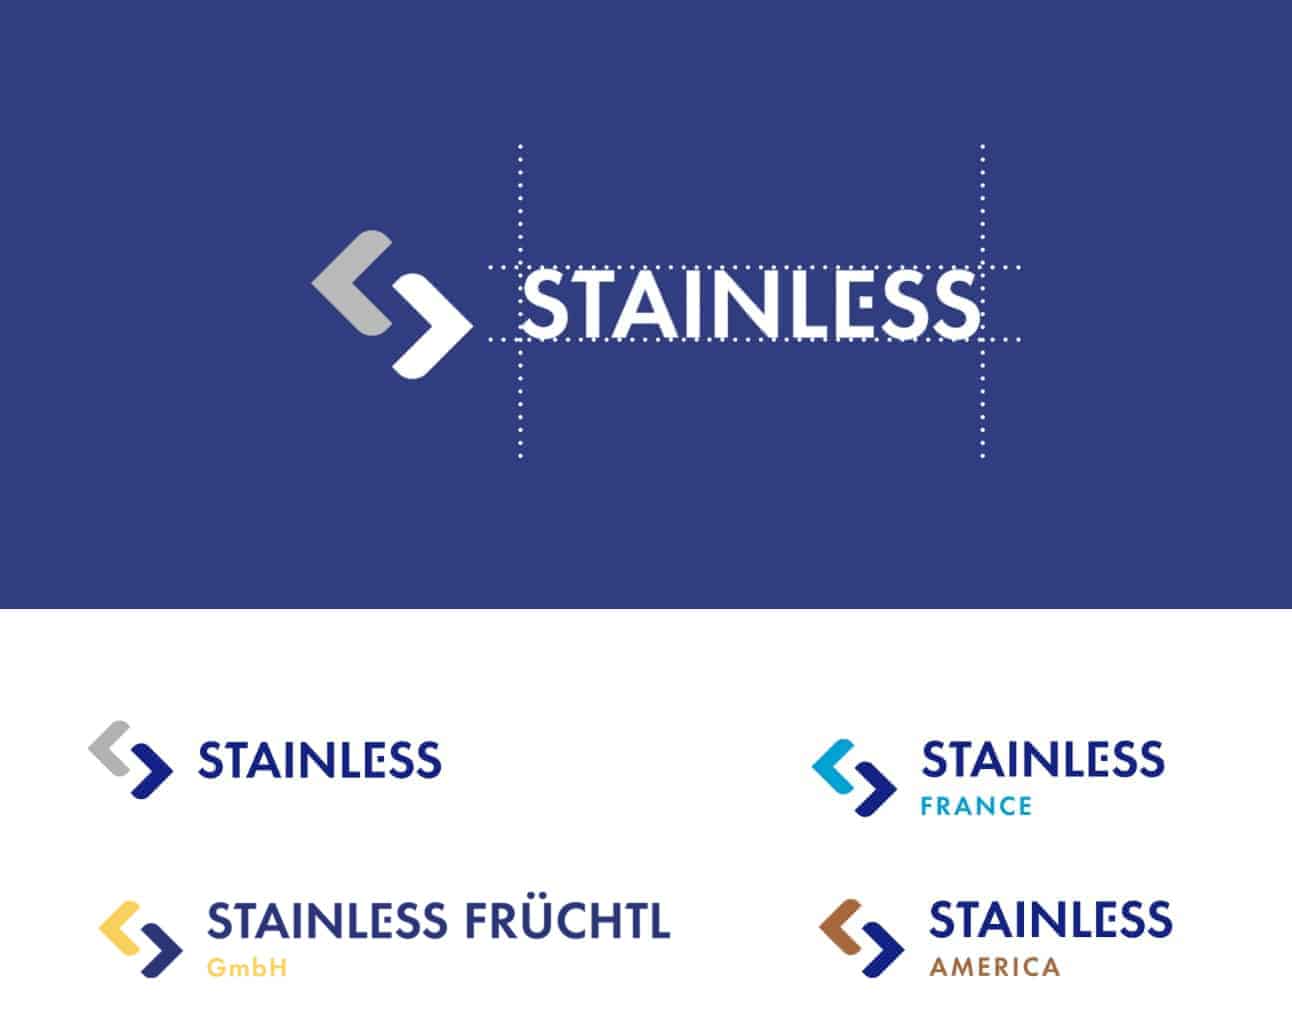 New logo, new website... stainless has a new visual identity.